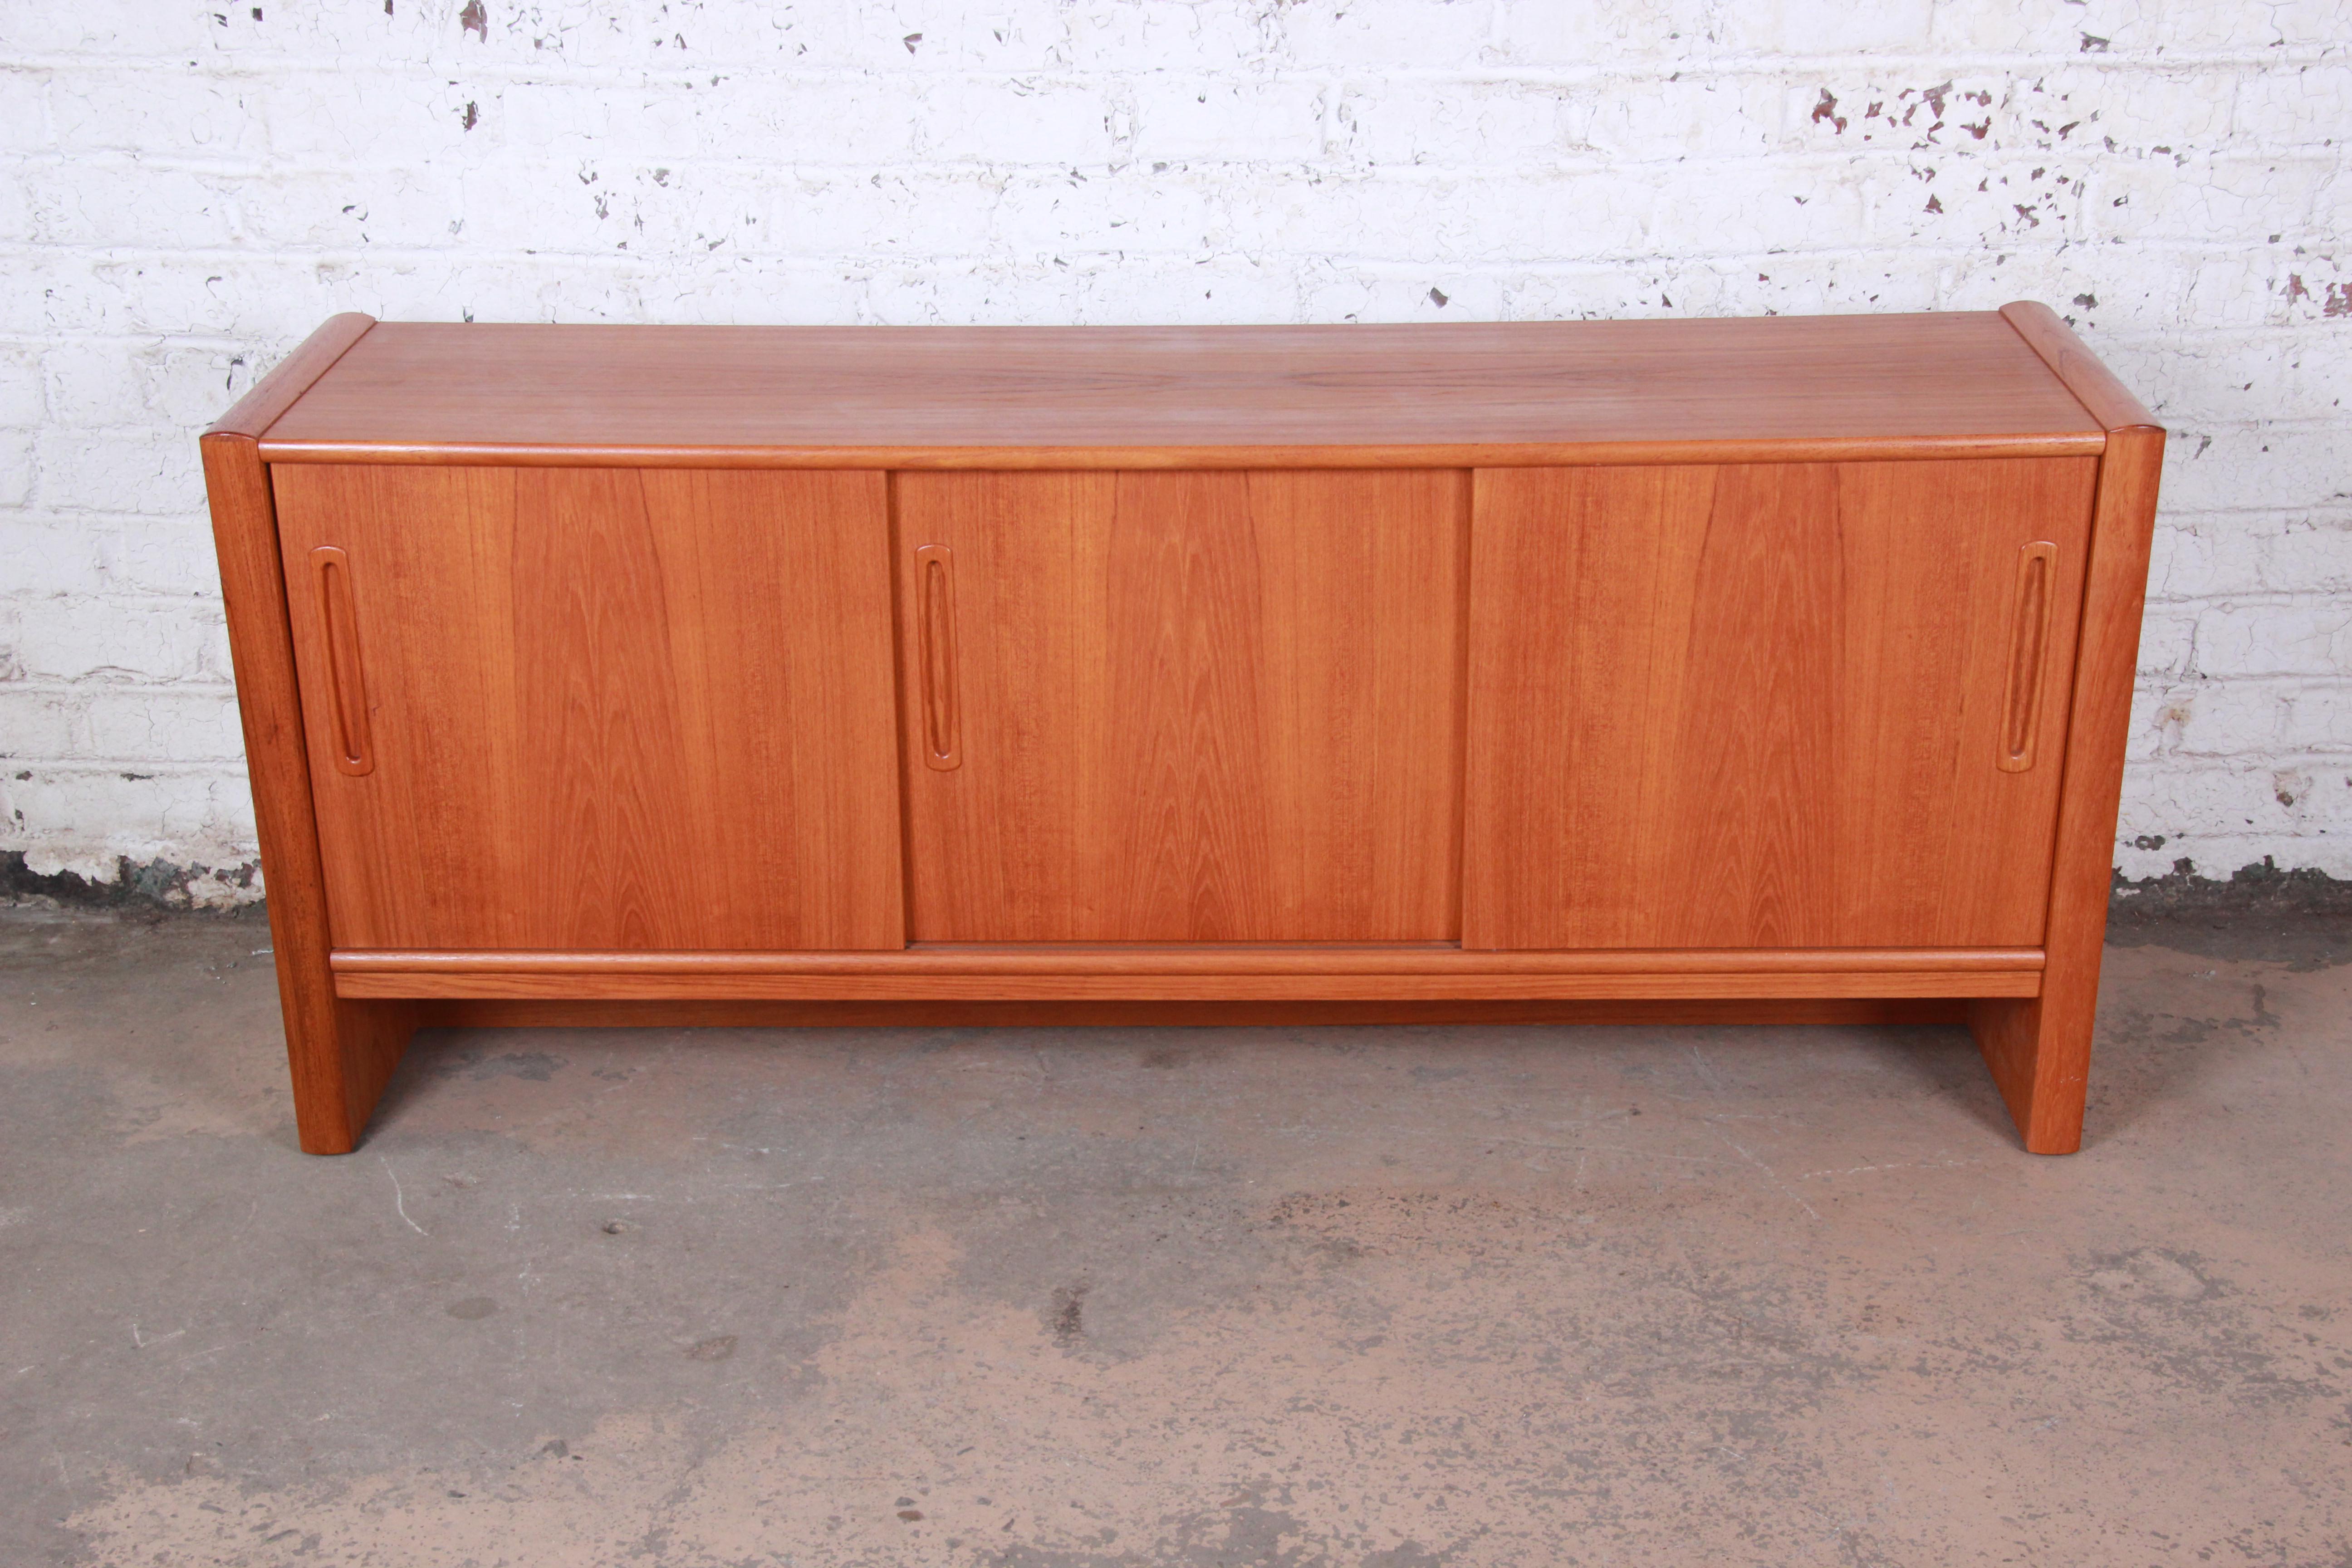 A very nice Danish modern teak sideboard or credenza. The credenza features gorgeous teak wood grain and sleek Danish design. It offers ample storage, with three cabinet spaces behind sliding doors. There are two felt-lined drawers and a single